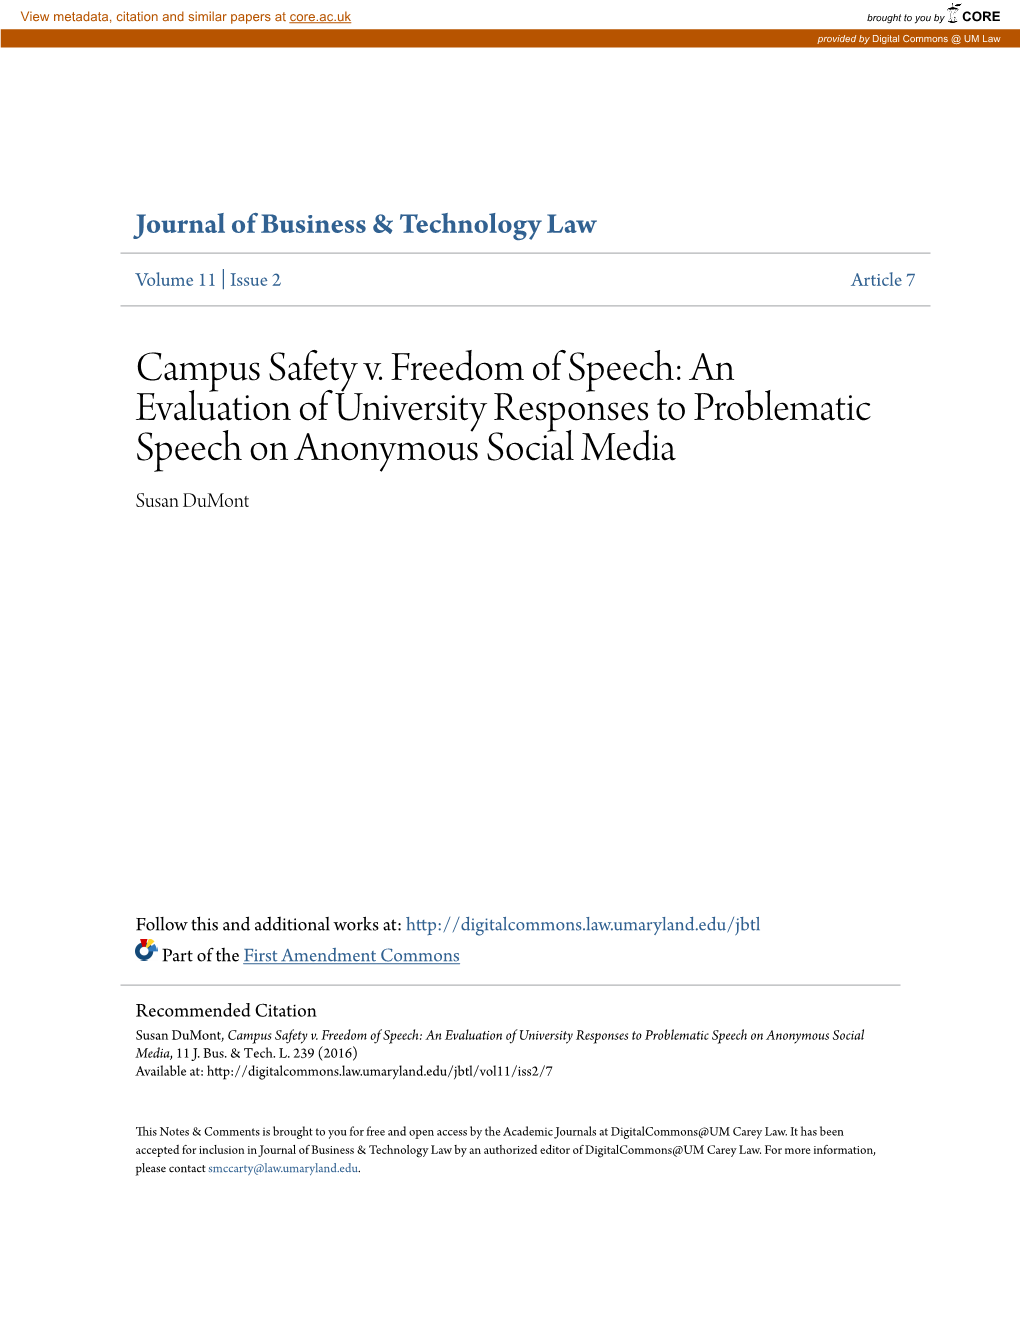 Campus Safety V. Freedom of Speech: an Evaluation of University Responses to Problematic Speech on Anonymous Social Media Susan Dumont